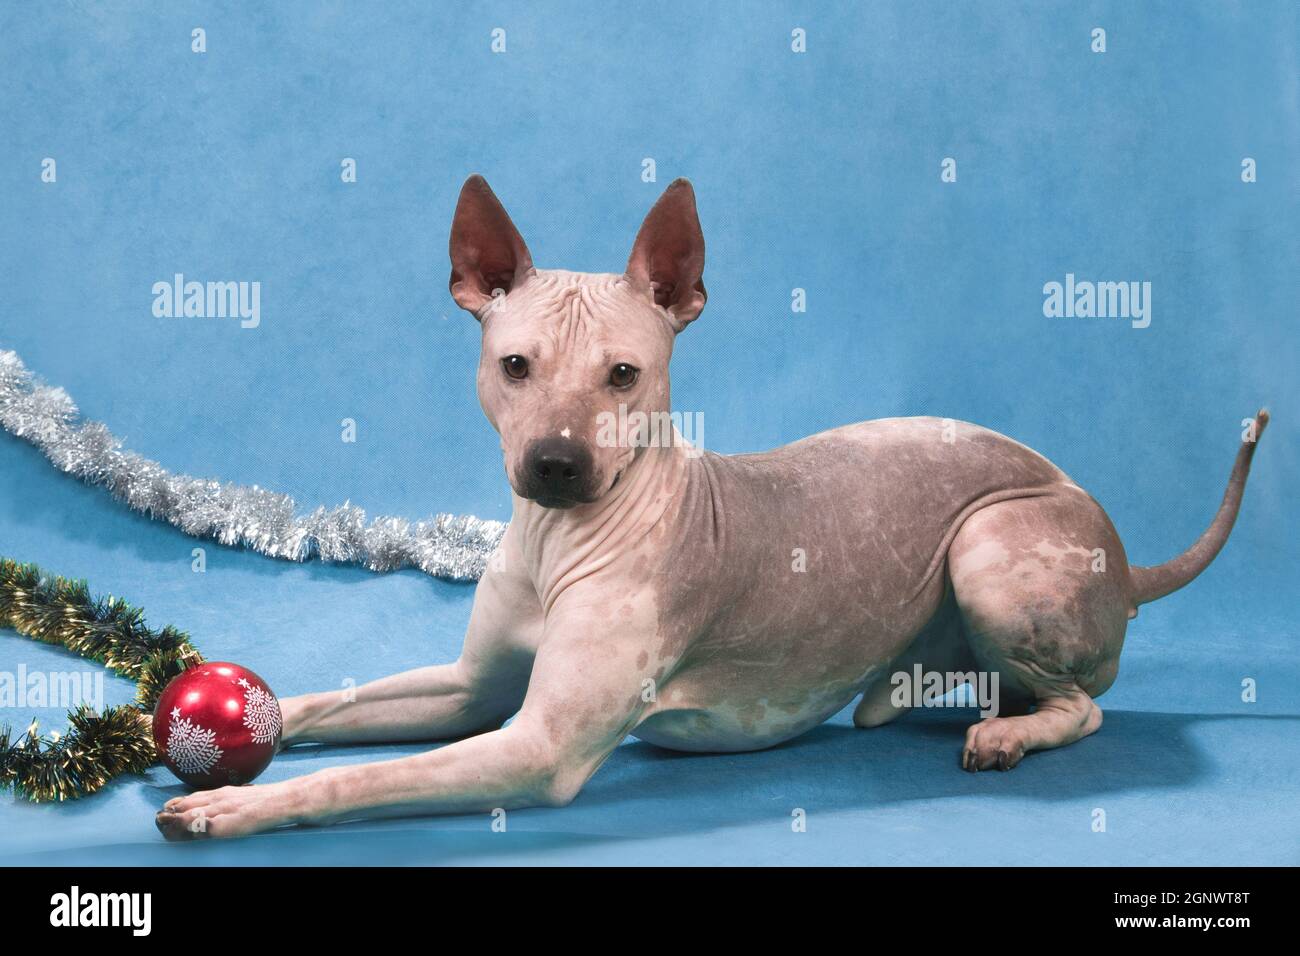 American hairless terrier lies on a blue background with a Christmas ball and tinsel Stock Photo